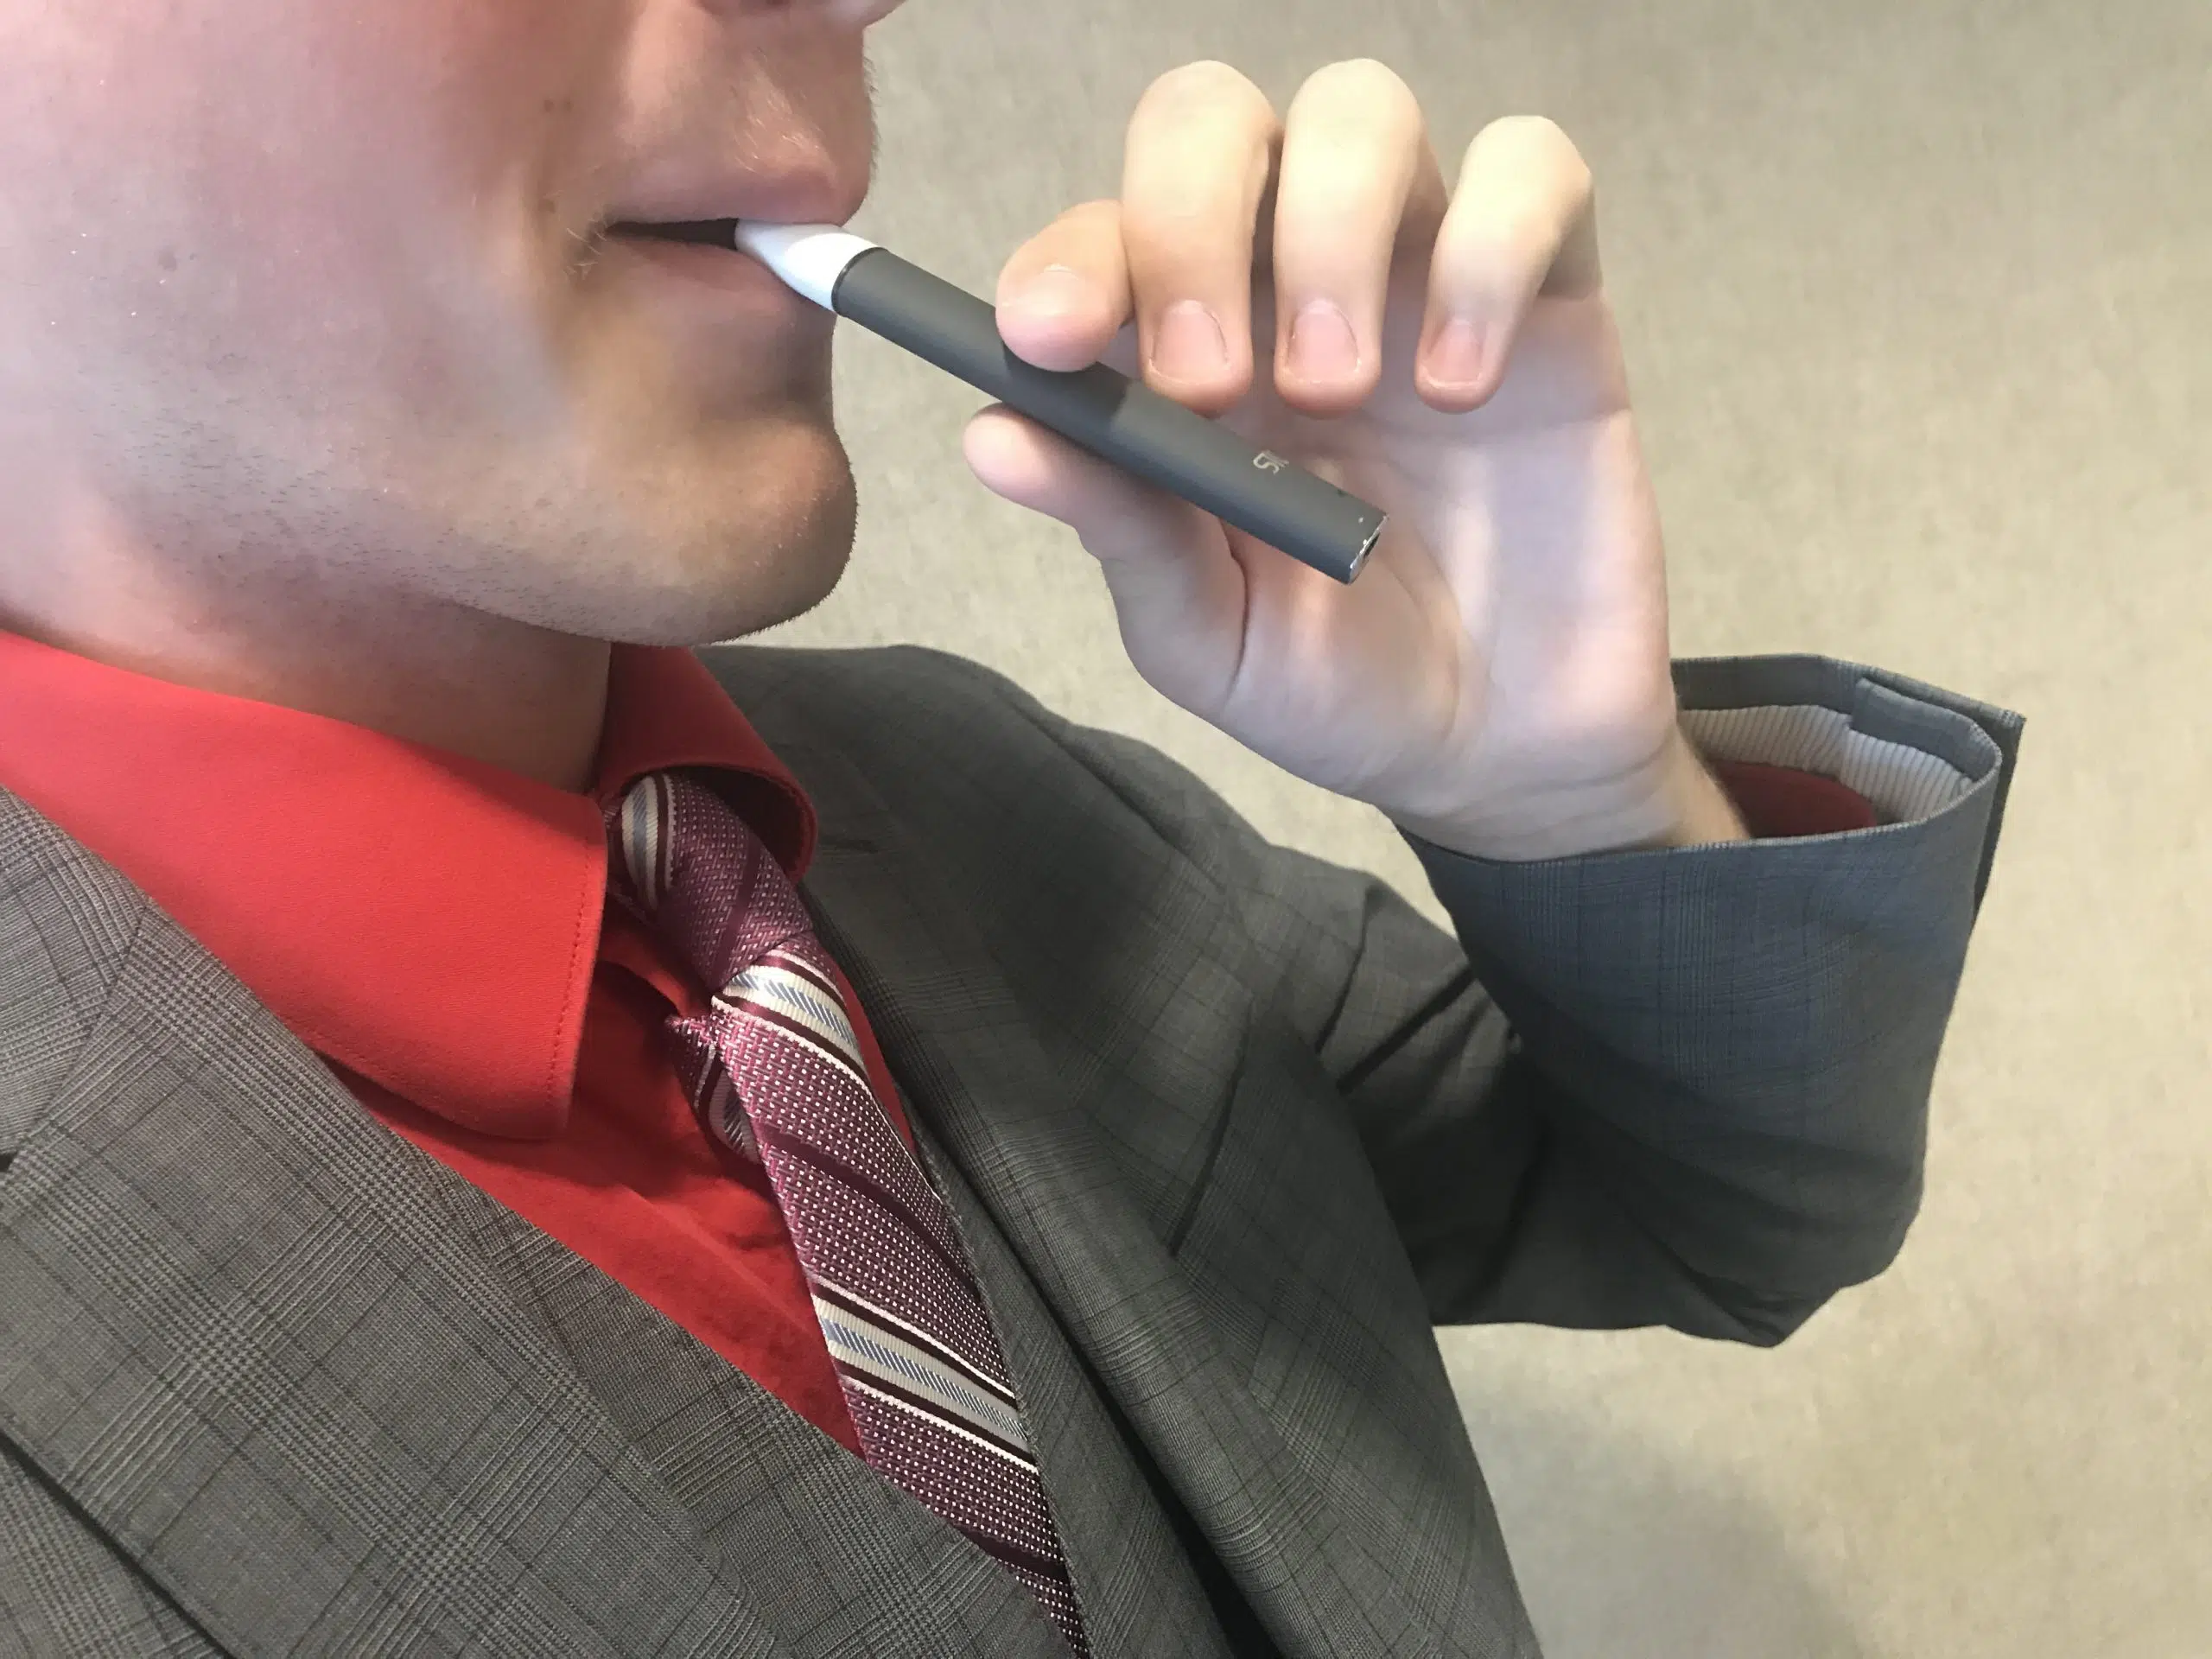 Provincial budget slaps tax on vaping products